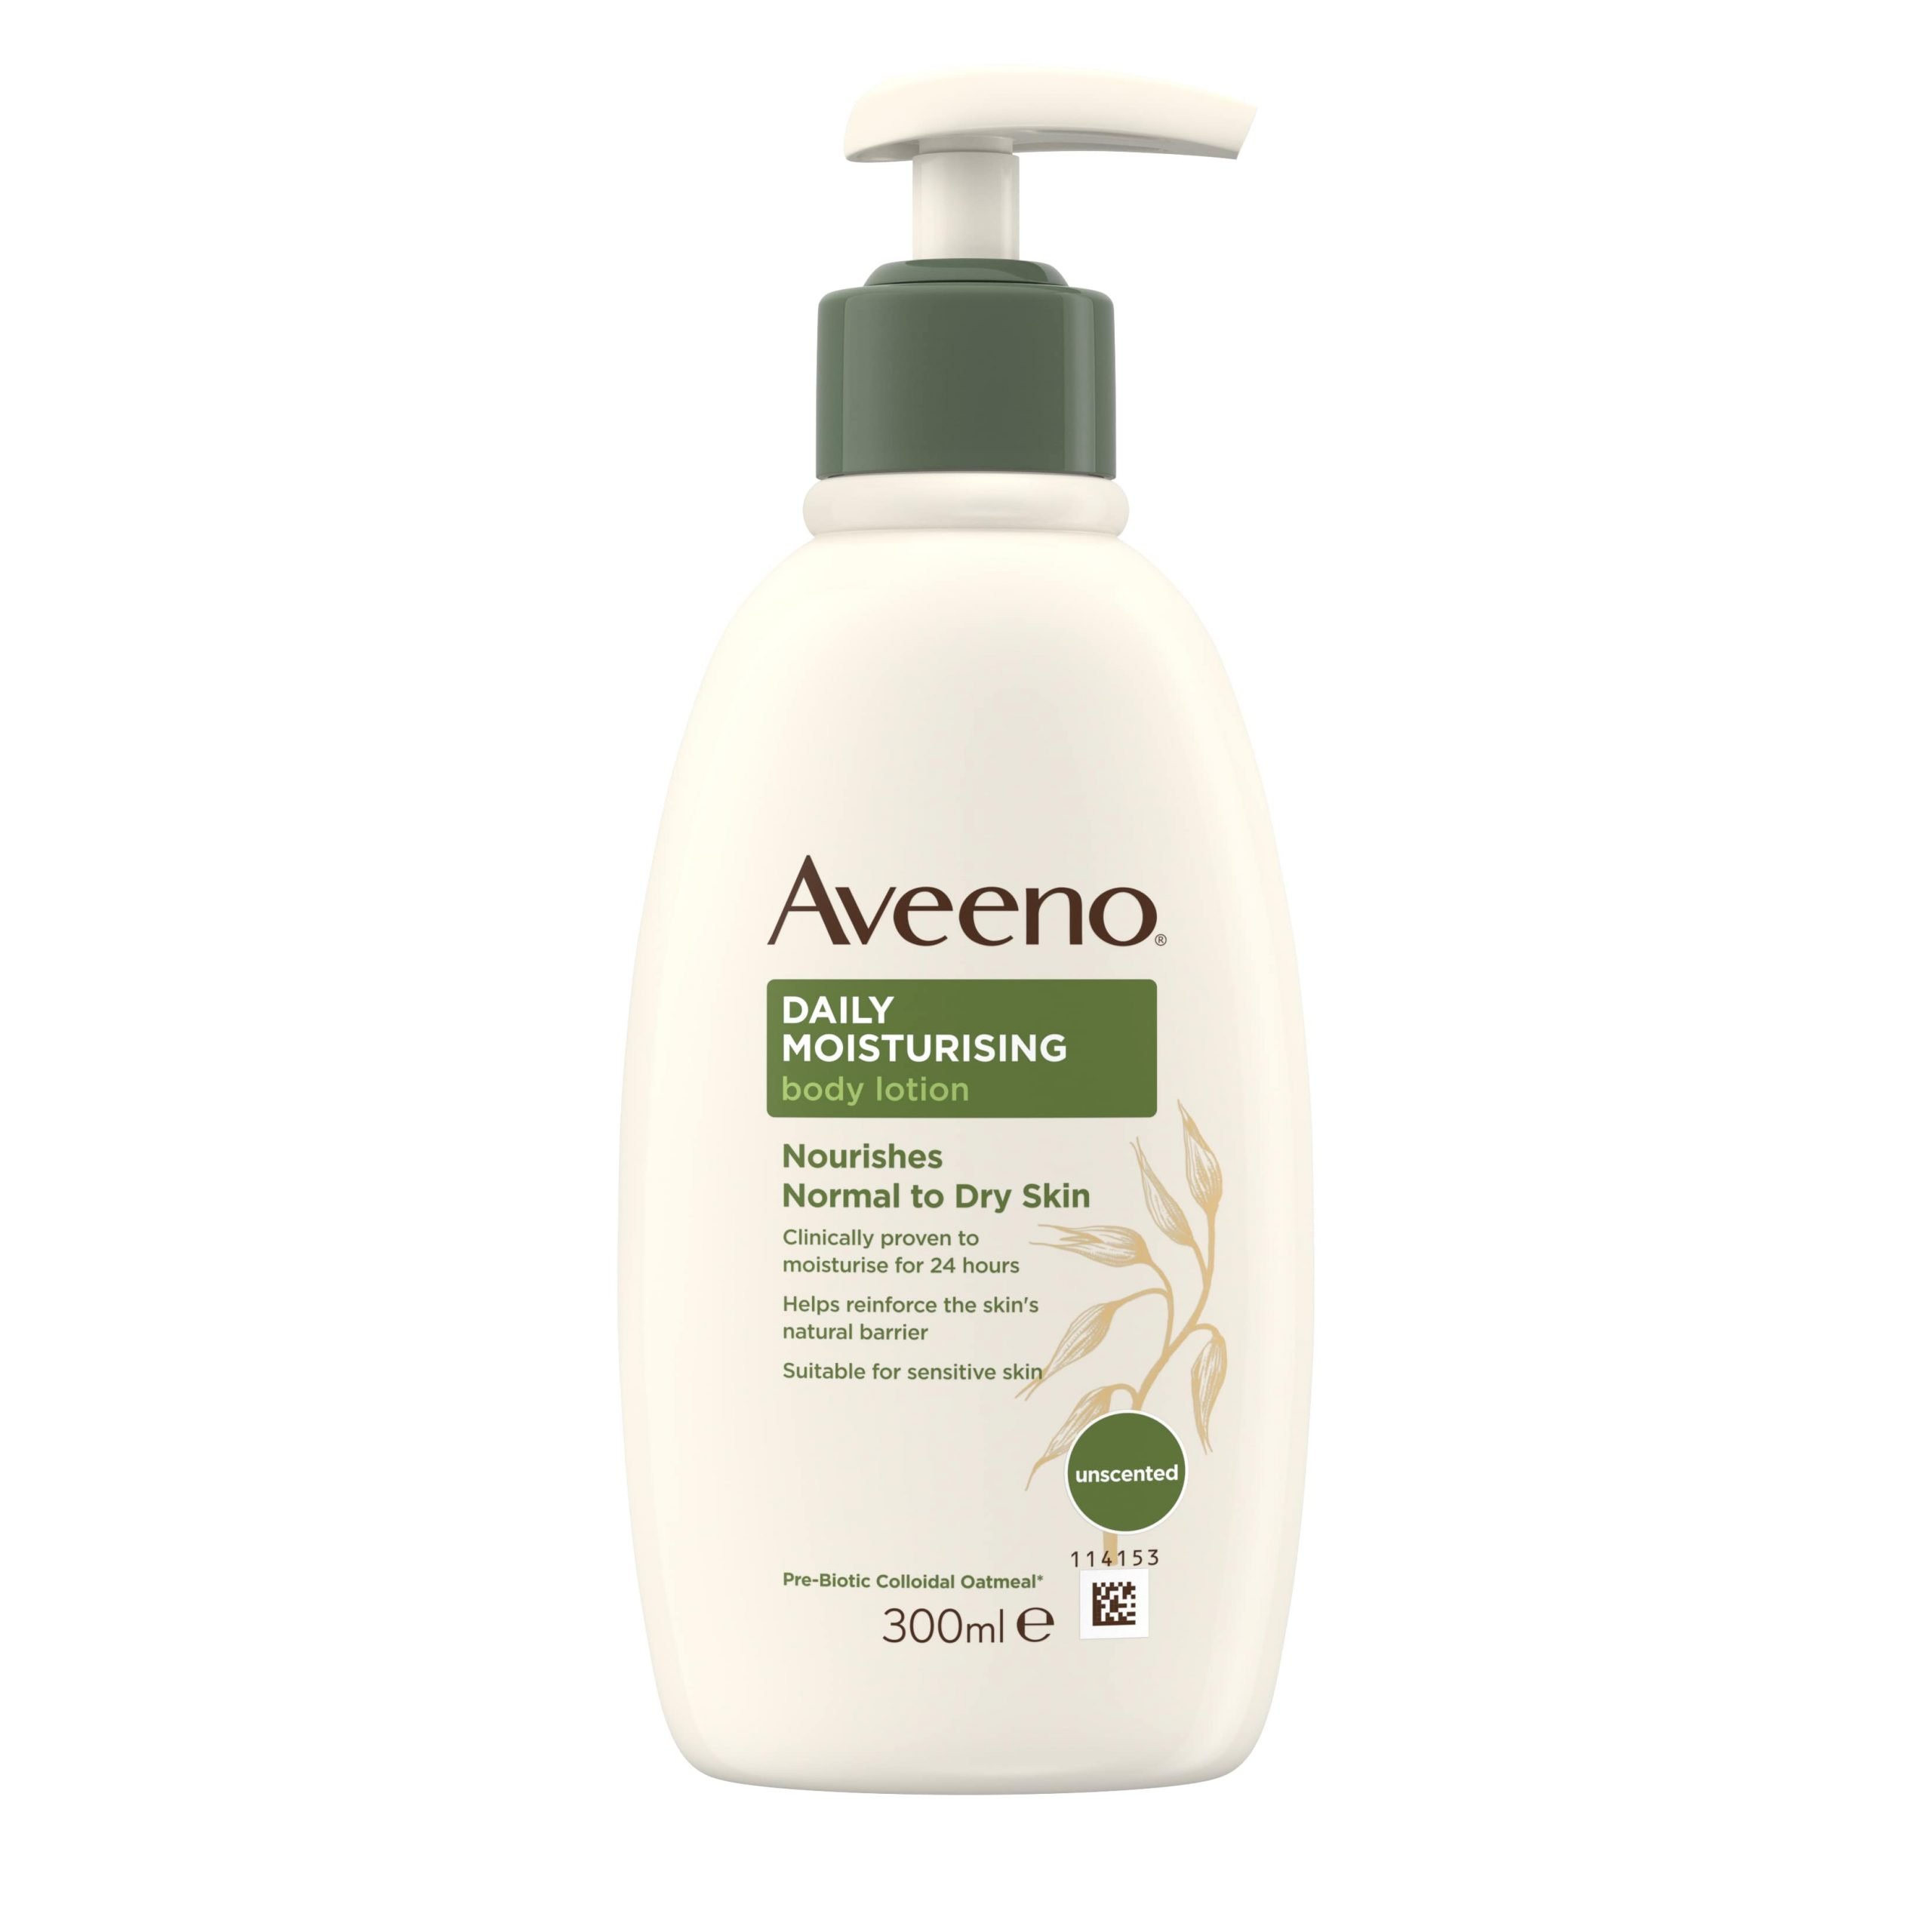 Can You Use Aveeno On Your Face